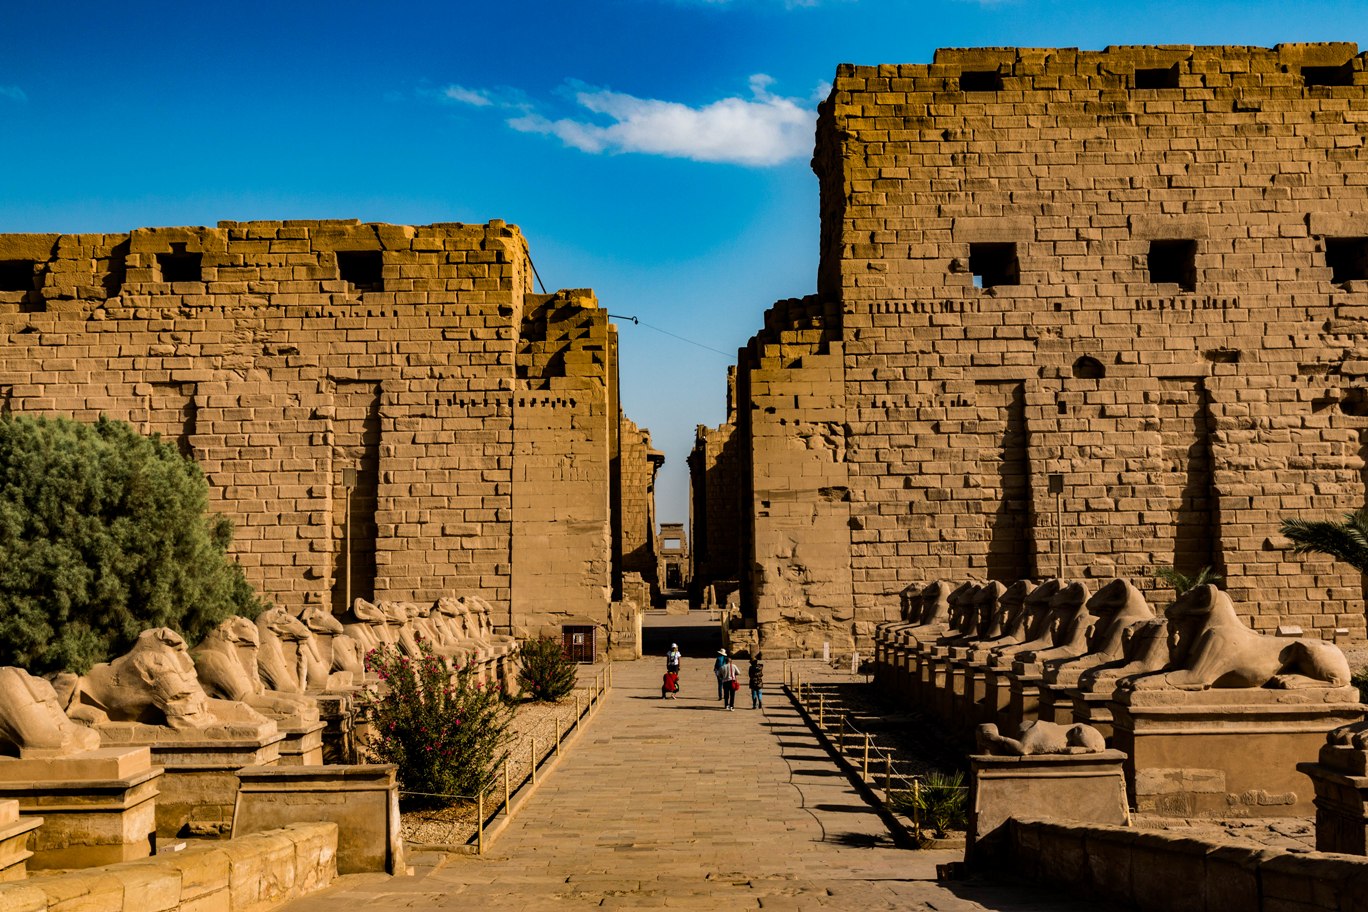 View from the entry of the amazing temple of Karnak, in Luxor Egypt.